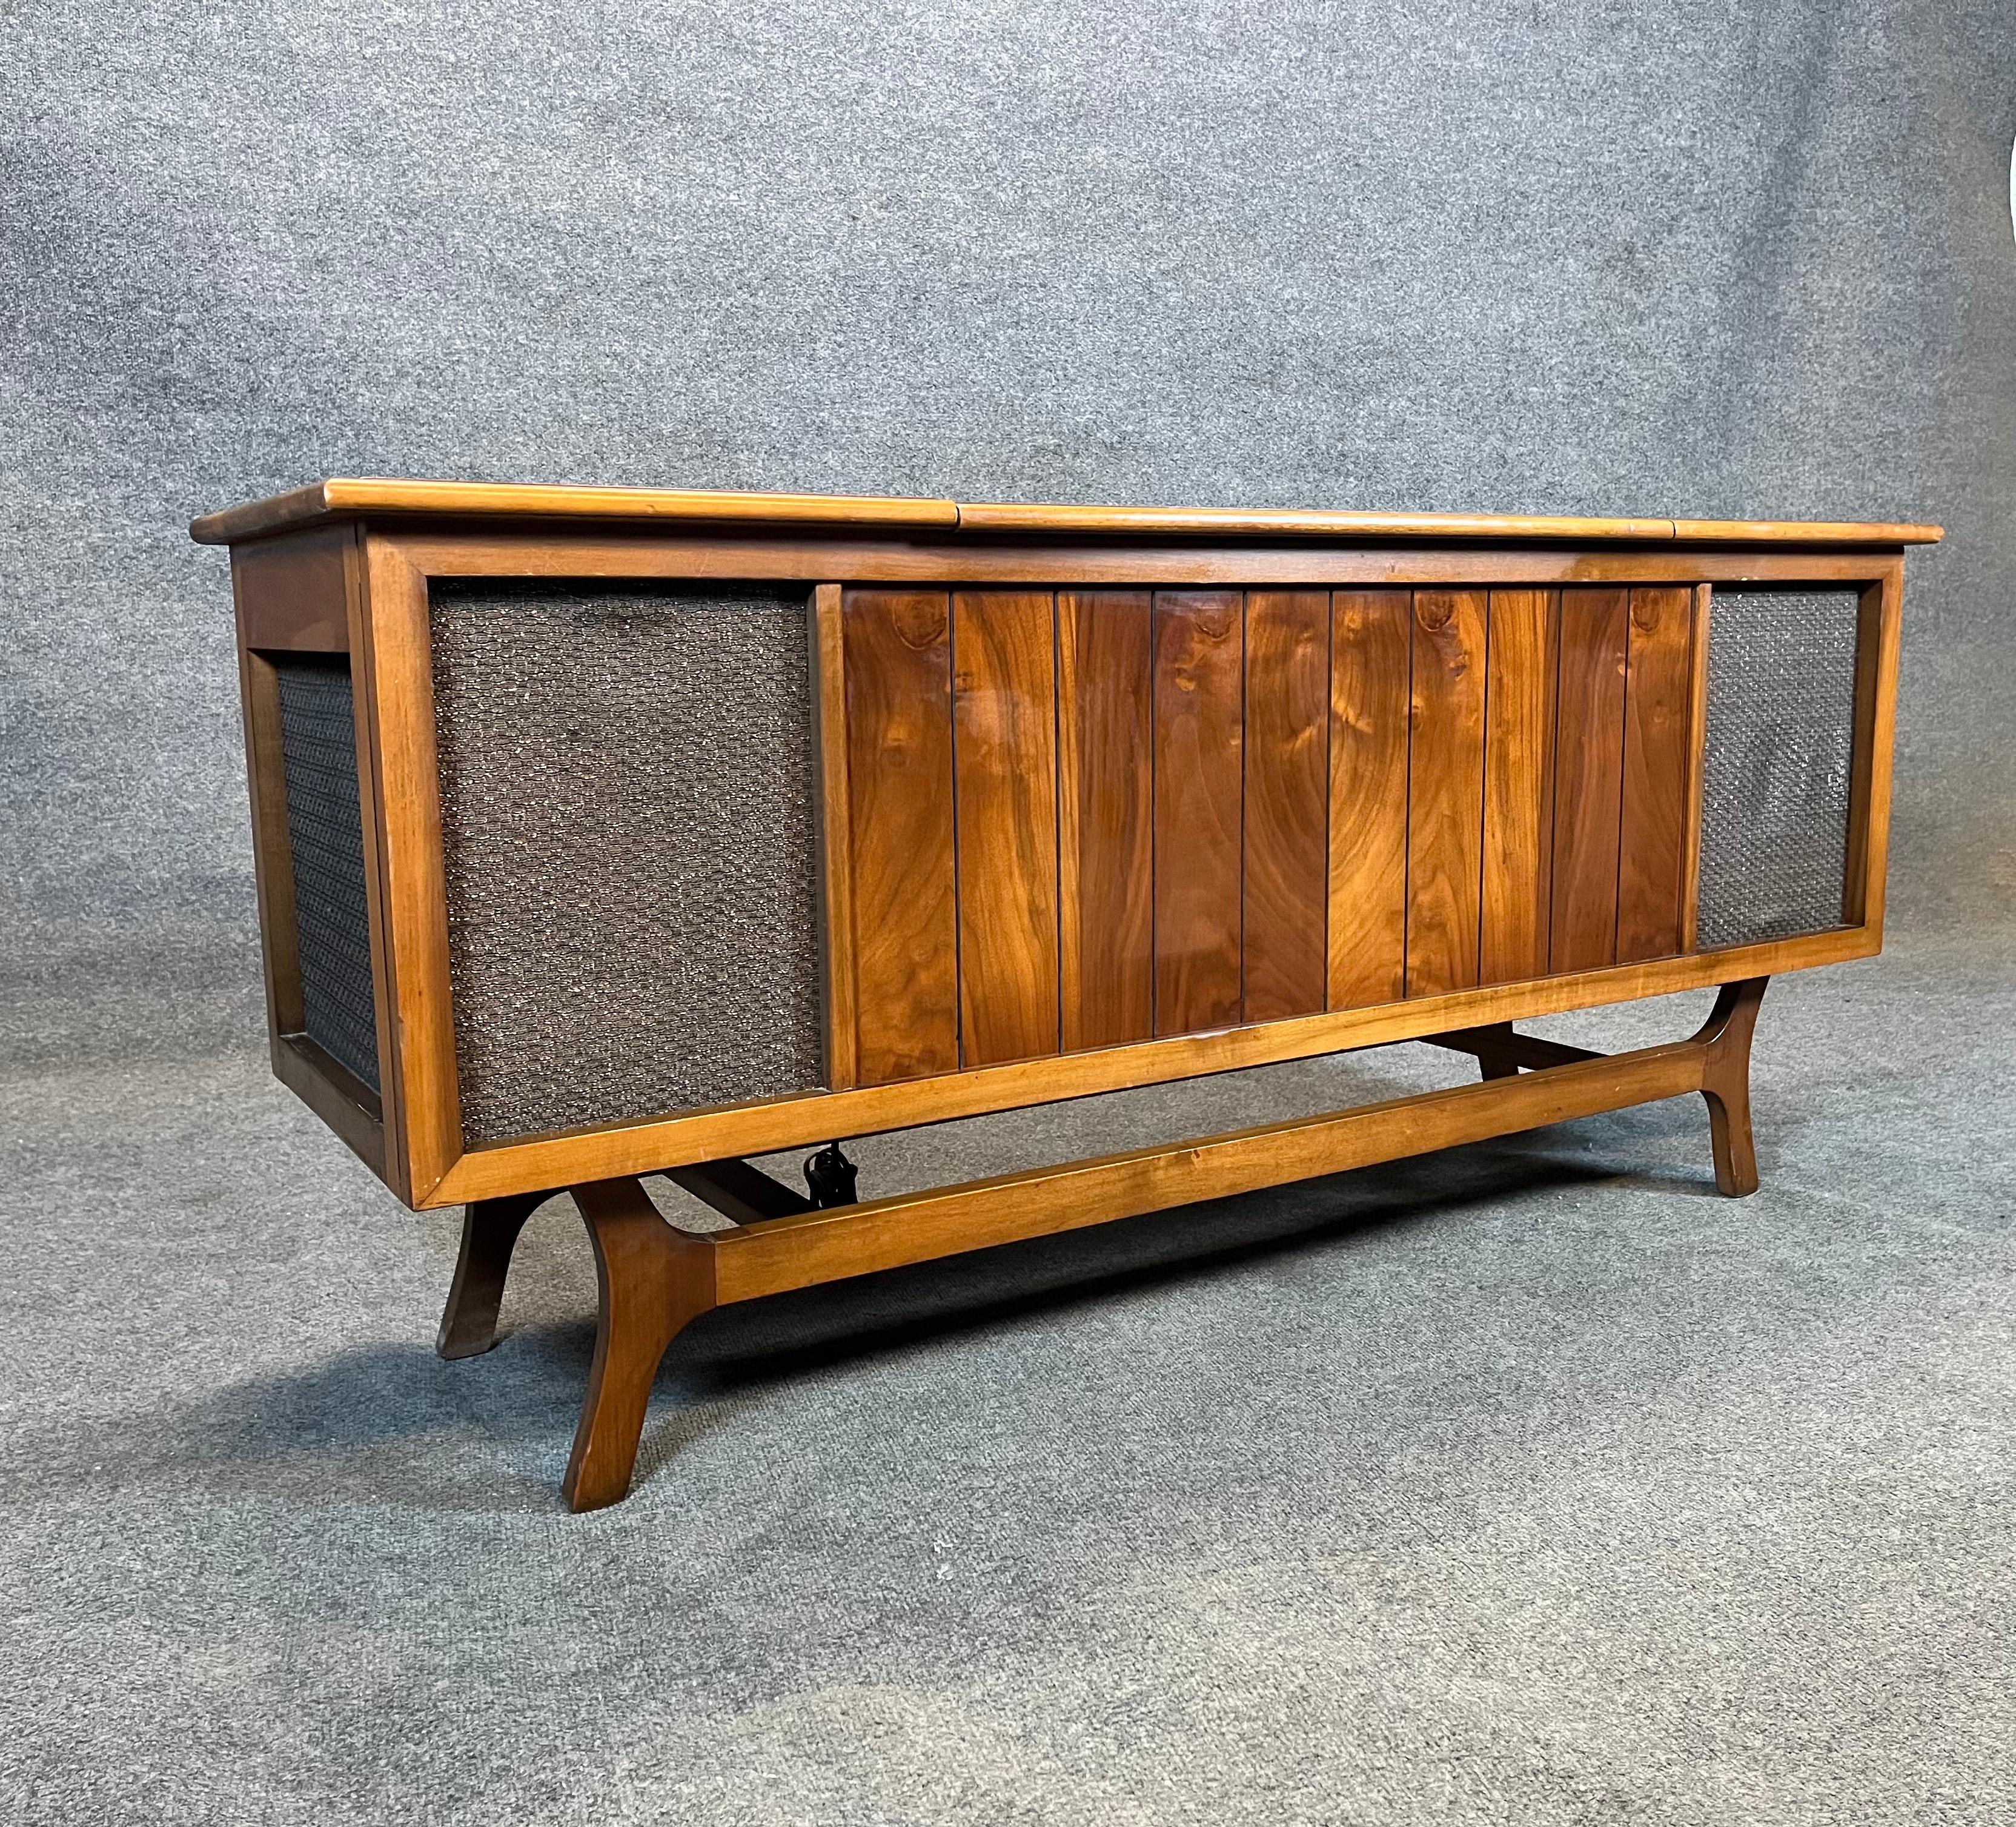 Here is a super cool vintage mid century stereo/record console by Airline. Produced in the 1960s. Great walnut finish on the piece with a really cool curved walnut base. Speakers and radio work, I was told that the record player works but needs a